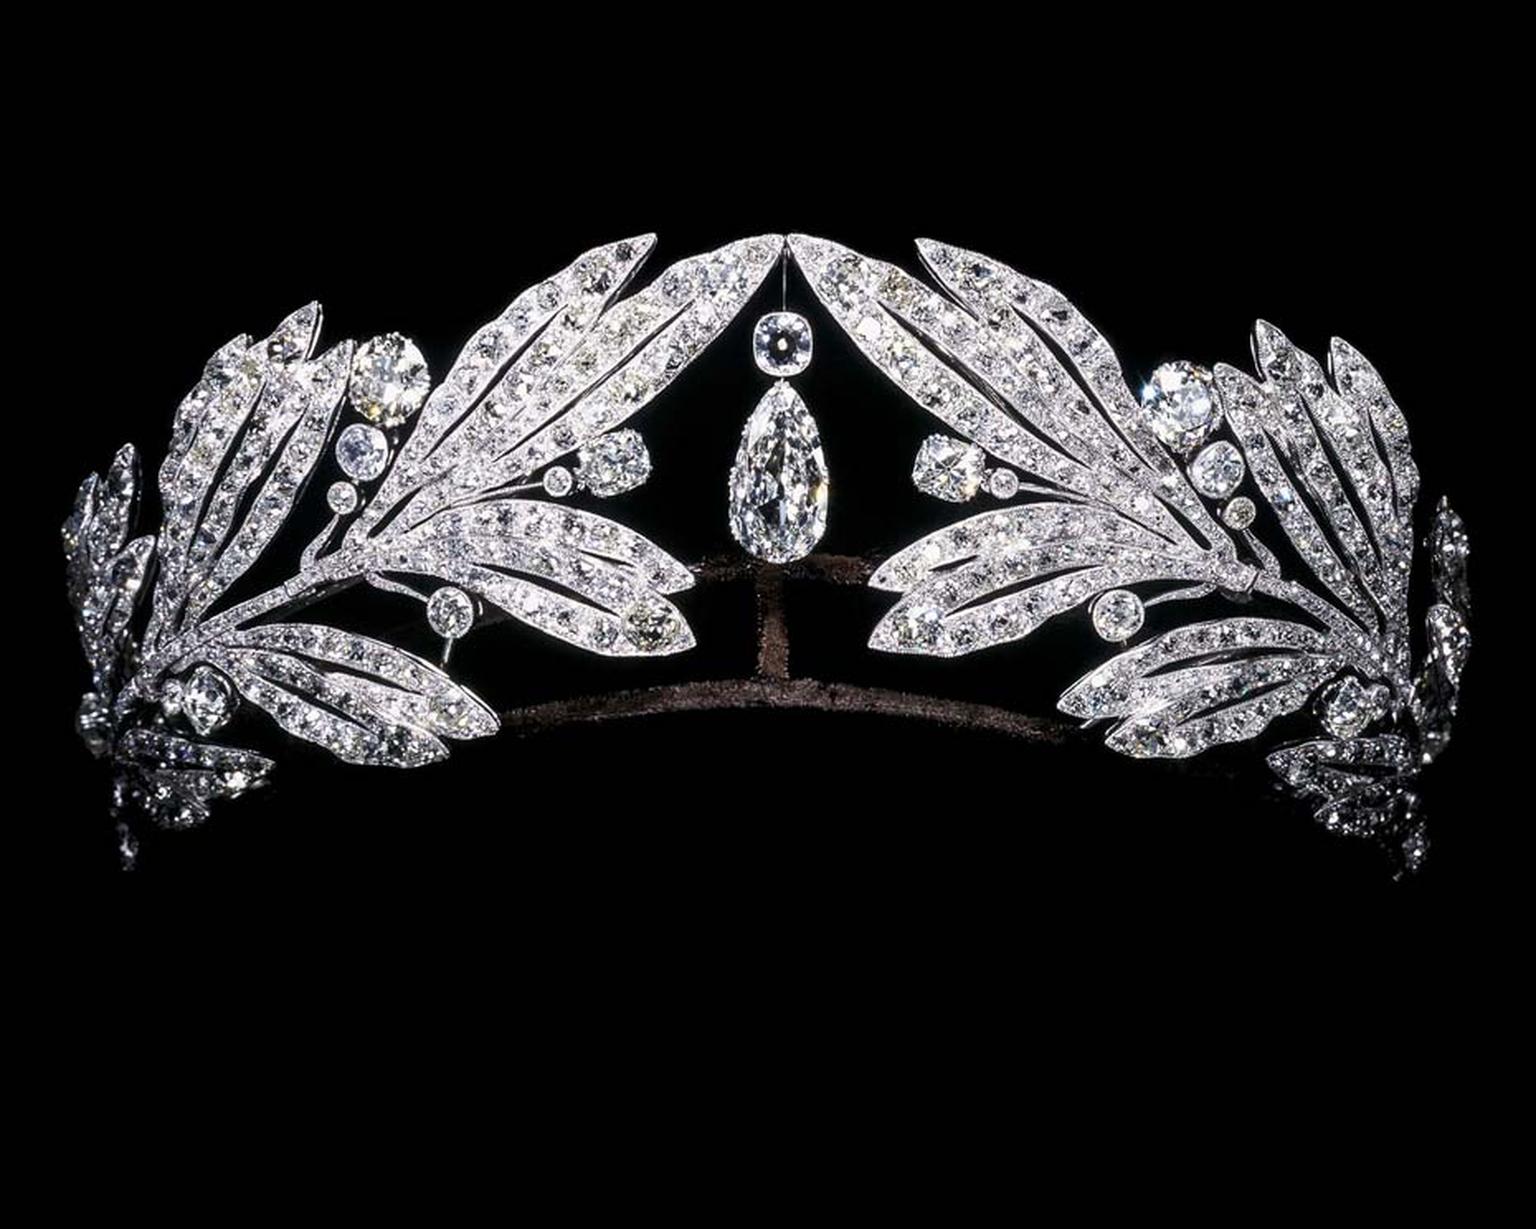 A Cartier diamond tiara is one of more than 250 pieces created between 1900 and 1975 that are on show at Cartier's dazzling Brilliant exhibition in Denver. © Cartier.